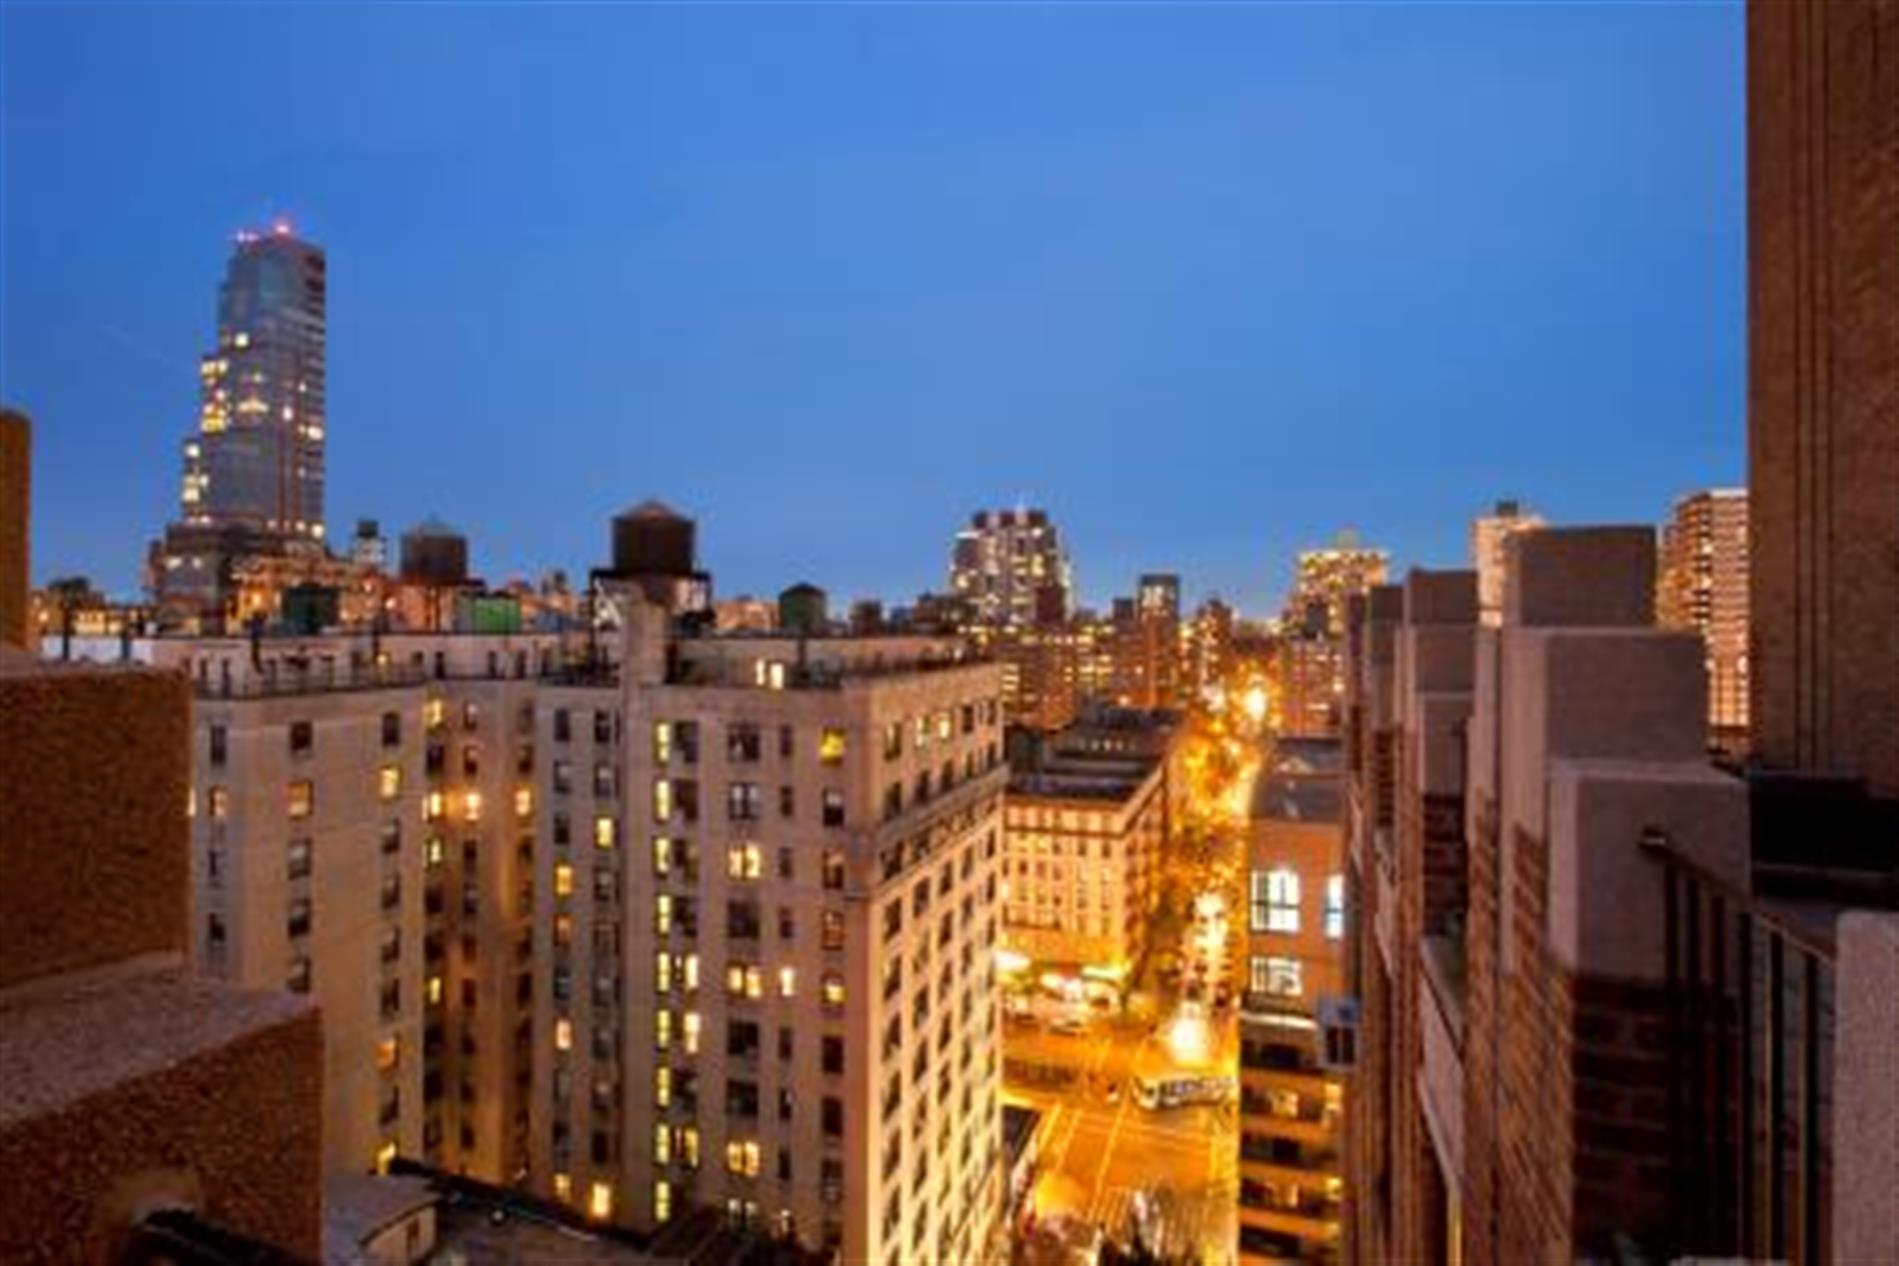 Two Bedrooms - Upper West Side